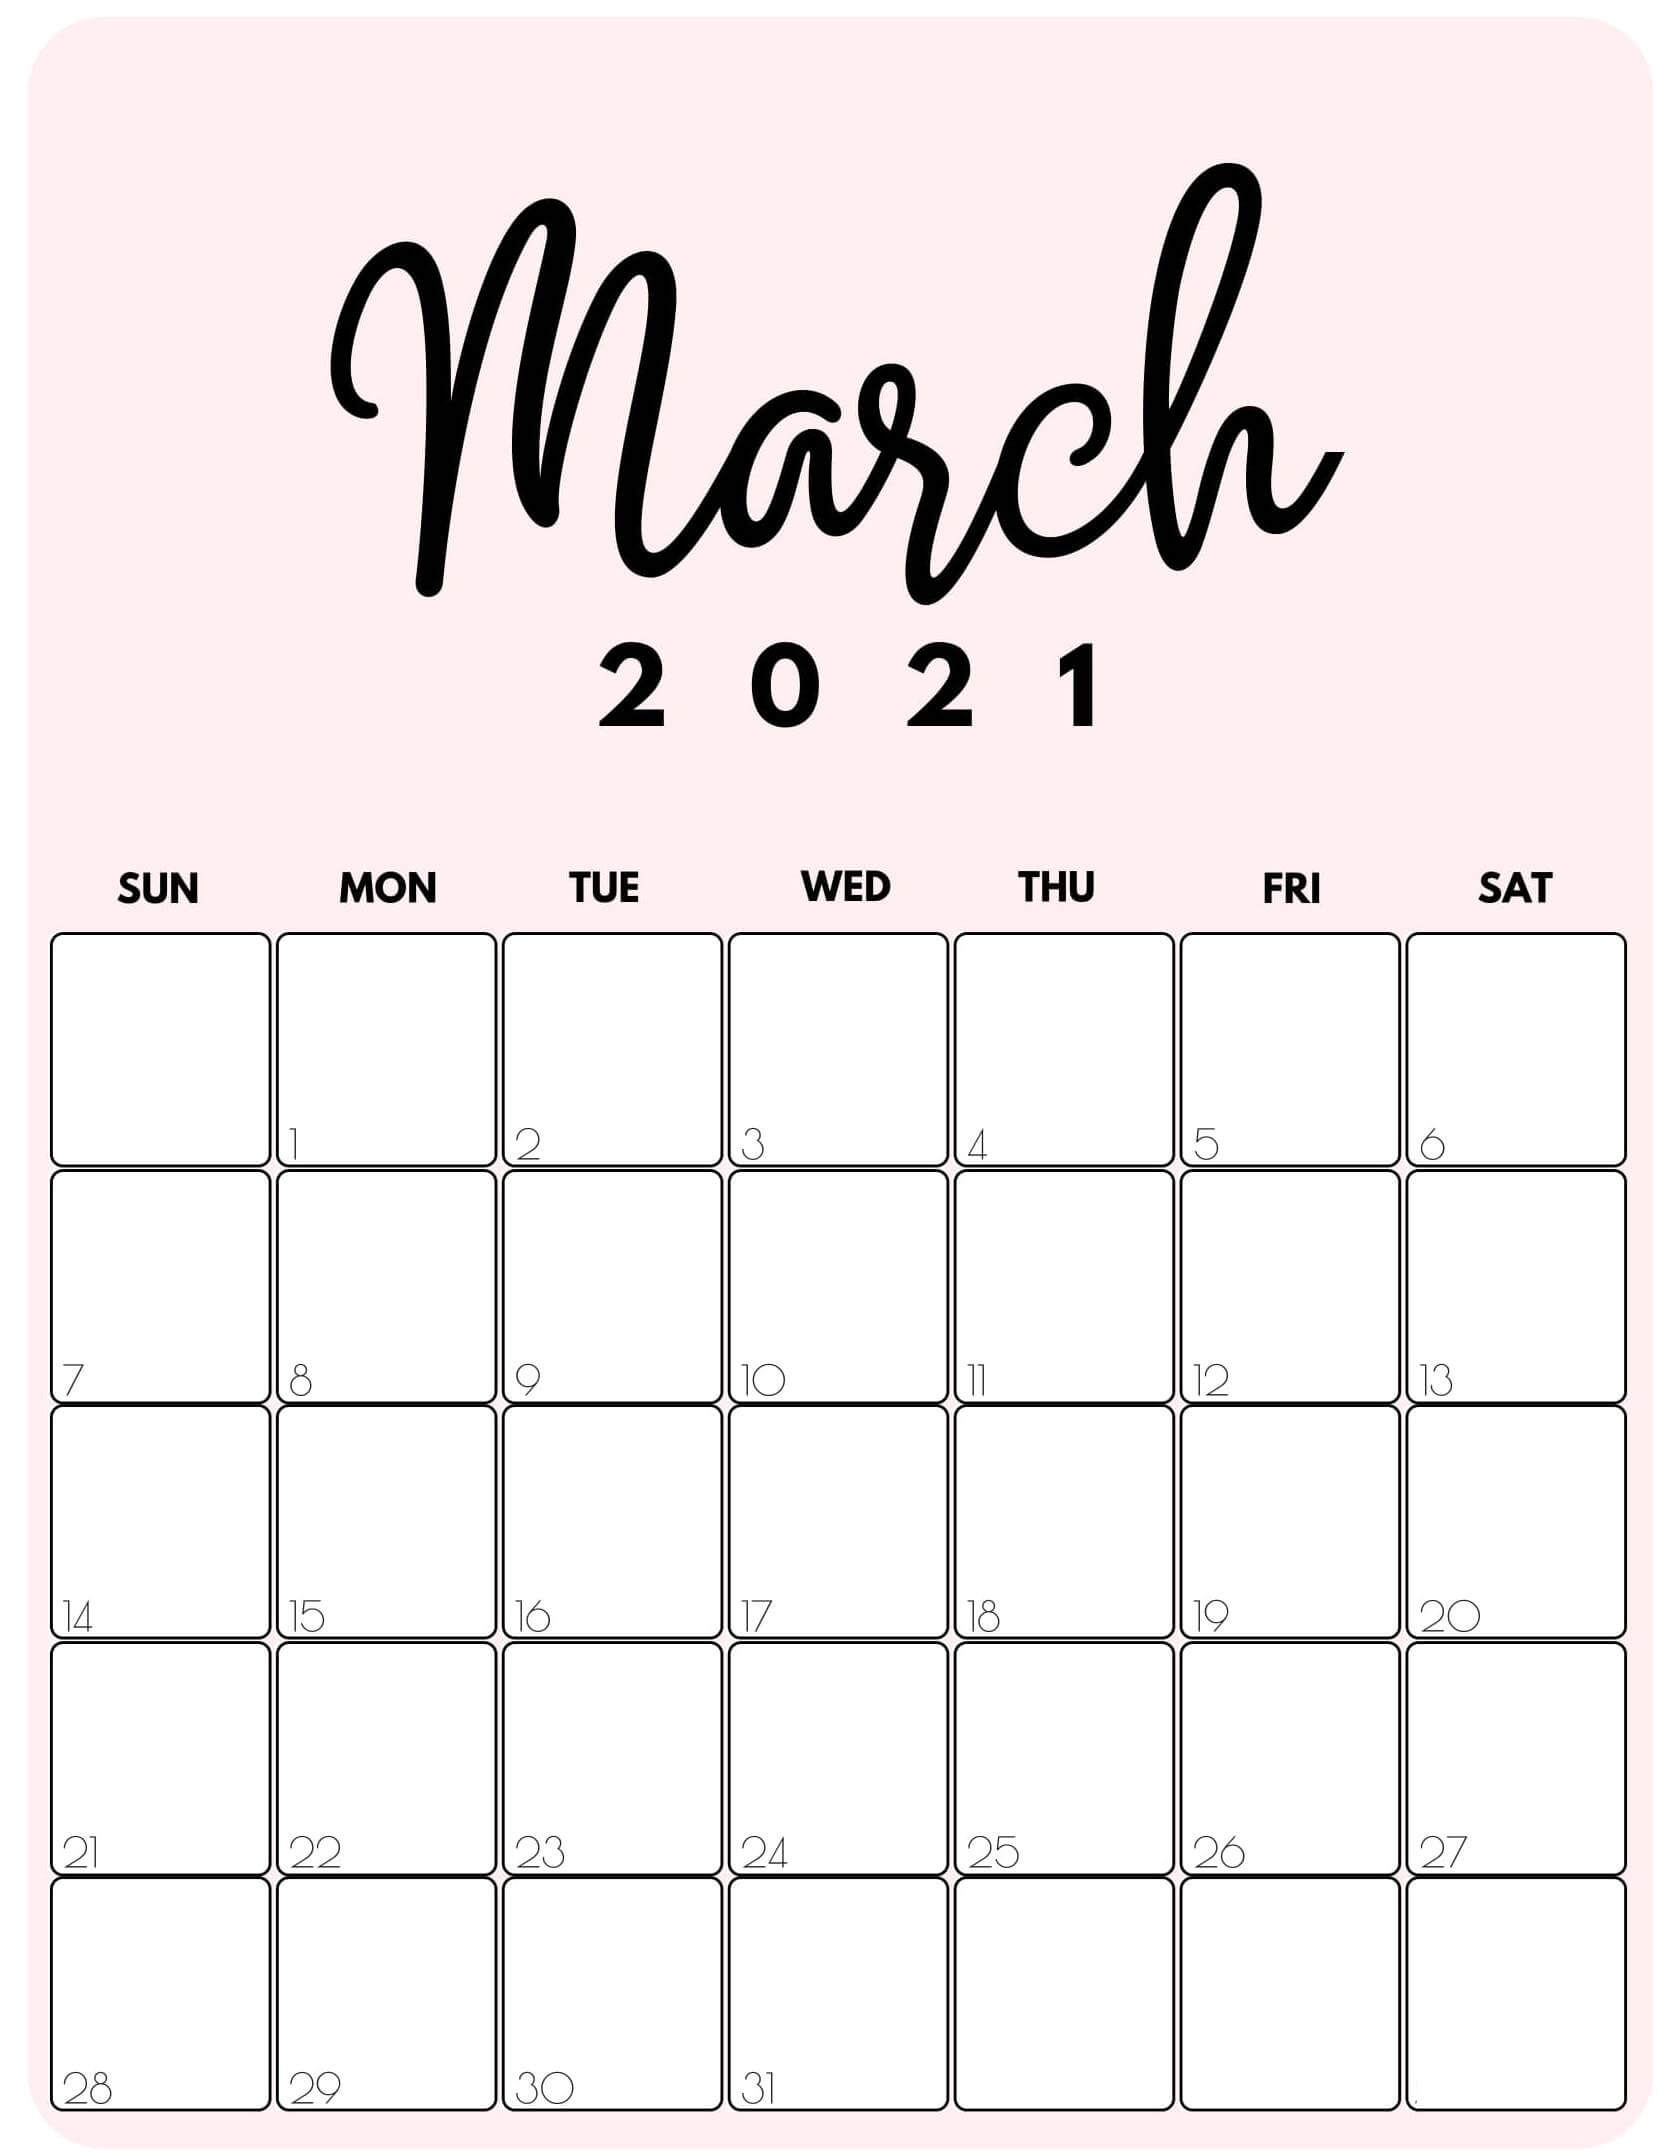 March 2021 Calendar Excel Template Printable - One